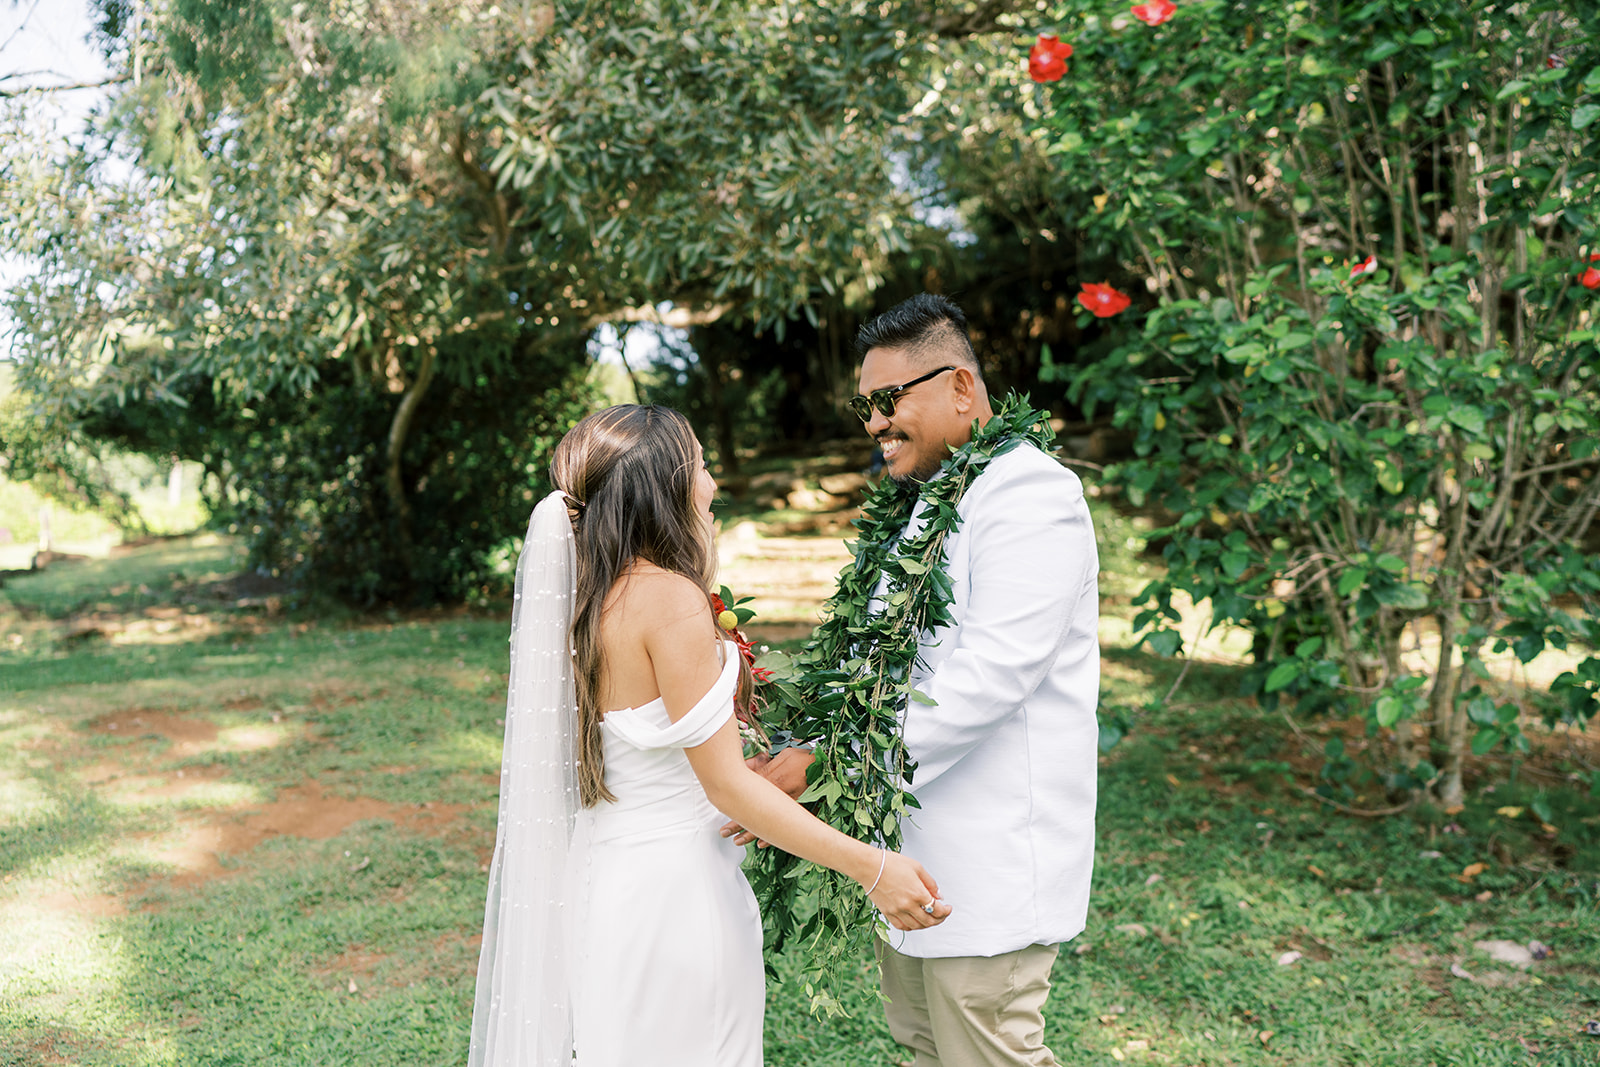 A newlywed couple holding hands and smiling at each other in a garden setting captured by Megan Moura